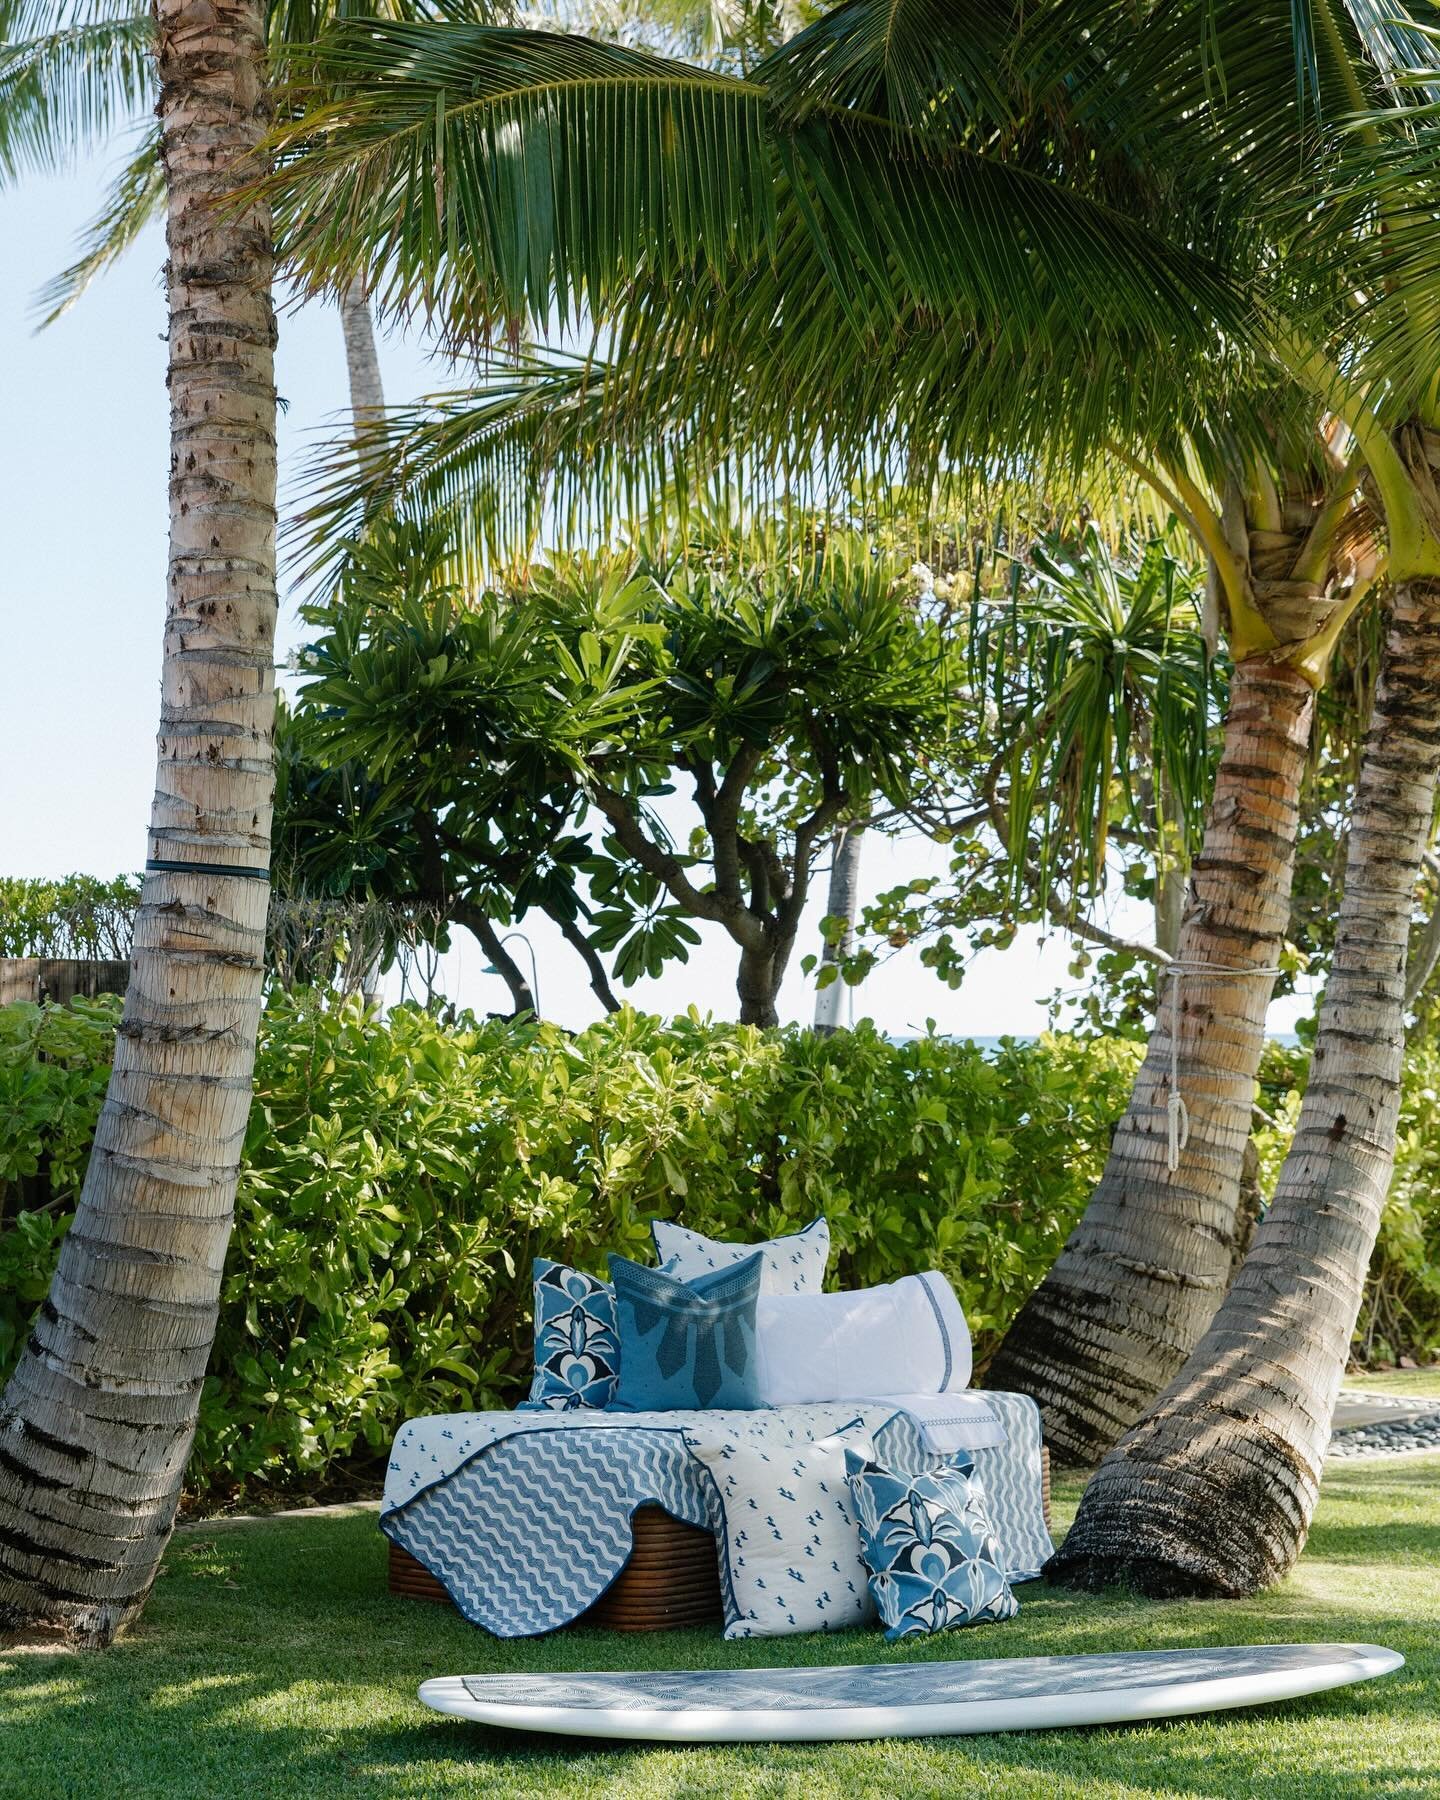 In @modernluxuryhawaii, @elasathern interviews Averylily co-founders! &ldquo;Home design entrepreneur, Lily Kanter, who has led three successful companies as a co-founder and CEO, including Serena &amp; Lily, Boon Supply and Mill Valley Baby &amp; Ki